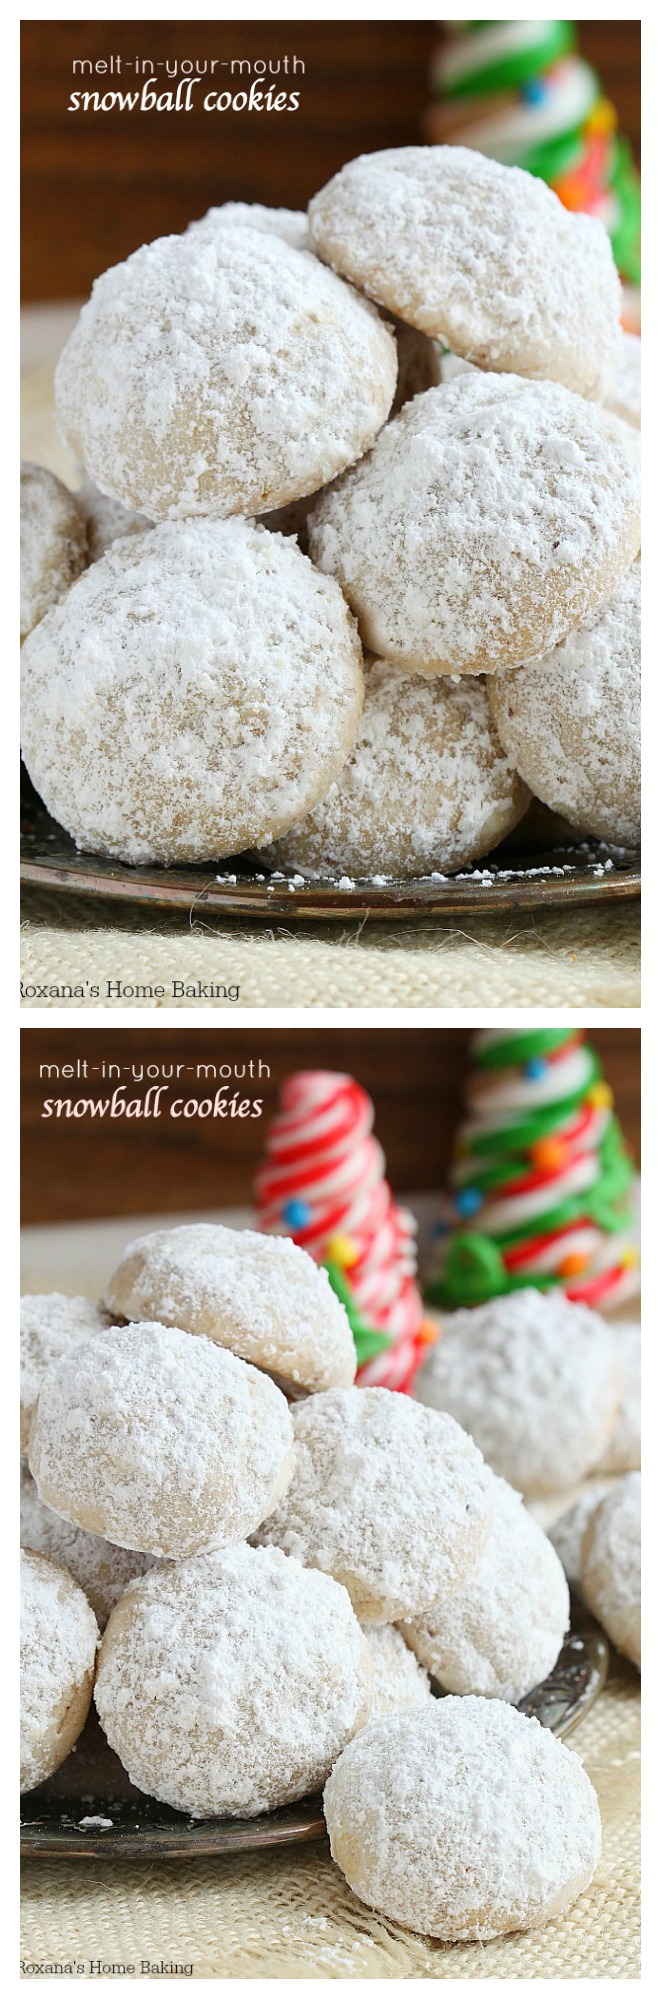 Melt-in-your-mouth buttery cookies, these shortbread like snowball cookies are one of the most requested baked treats at the cookie exchange. One bite and you’ll understand why they are so addictive!